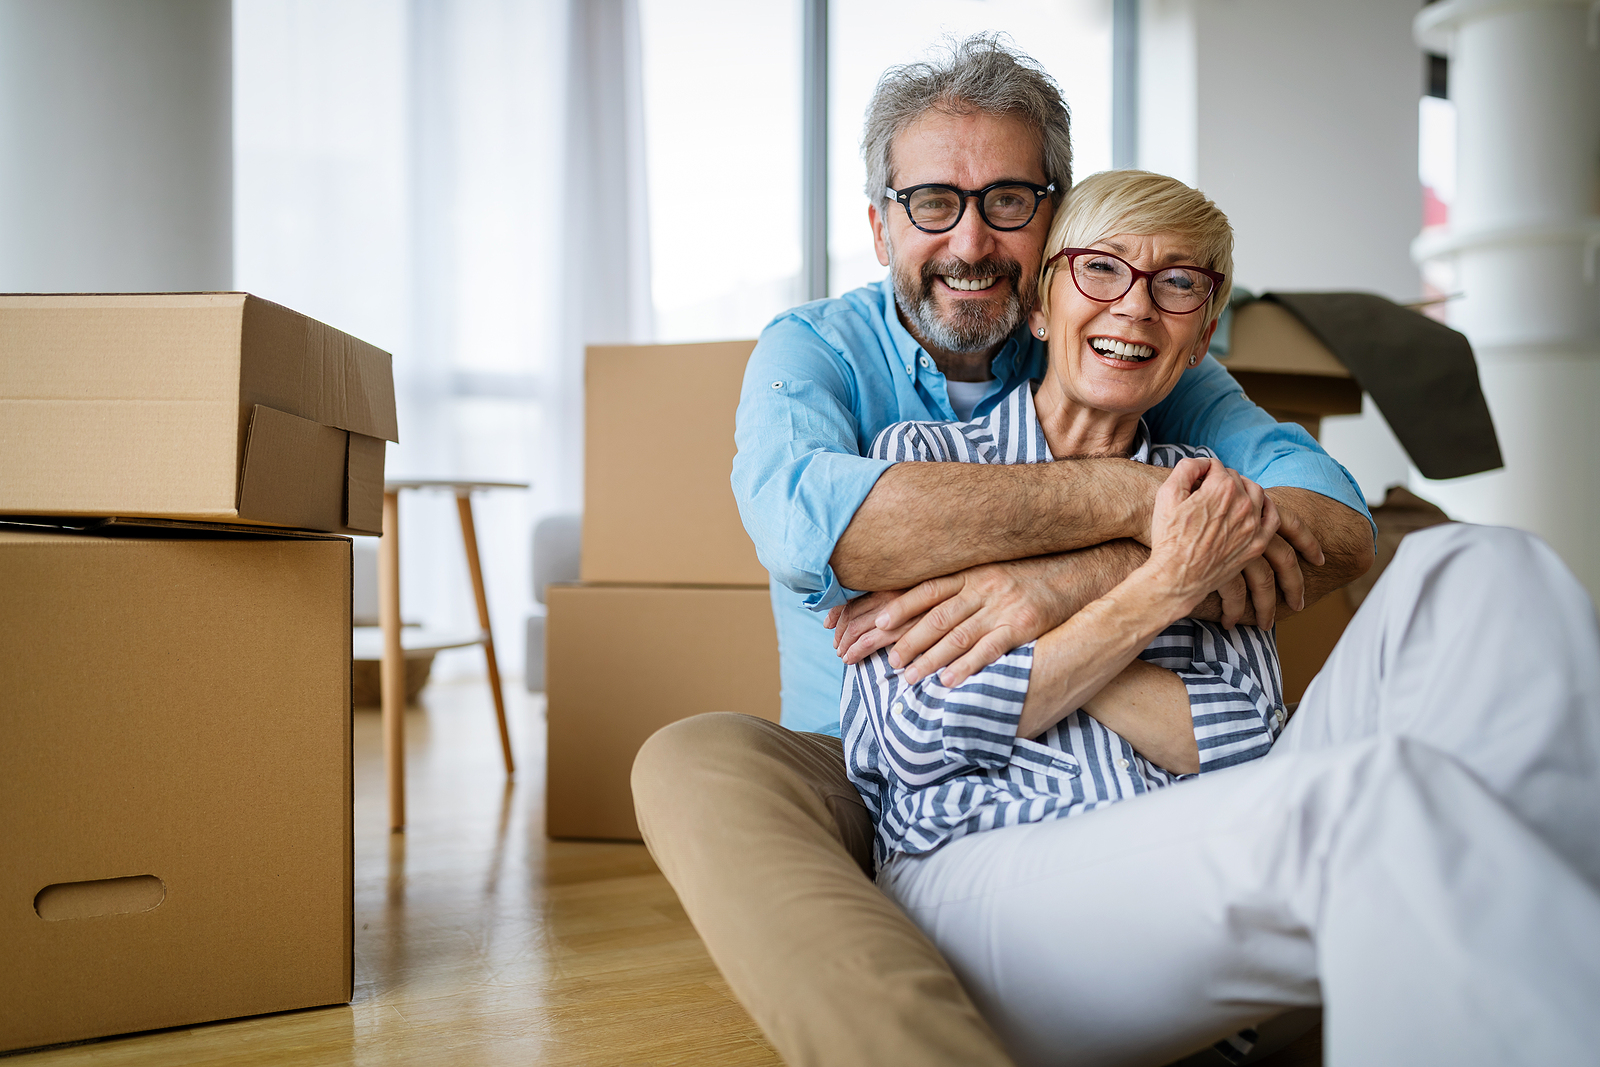 Senior-Friendly Guide to Downsizing in 2021